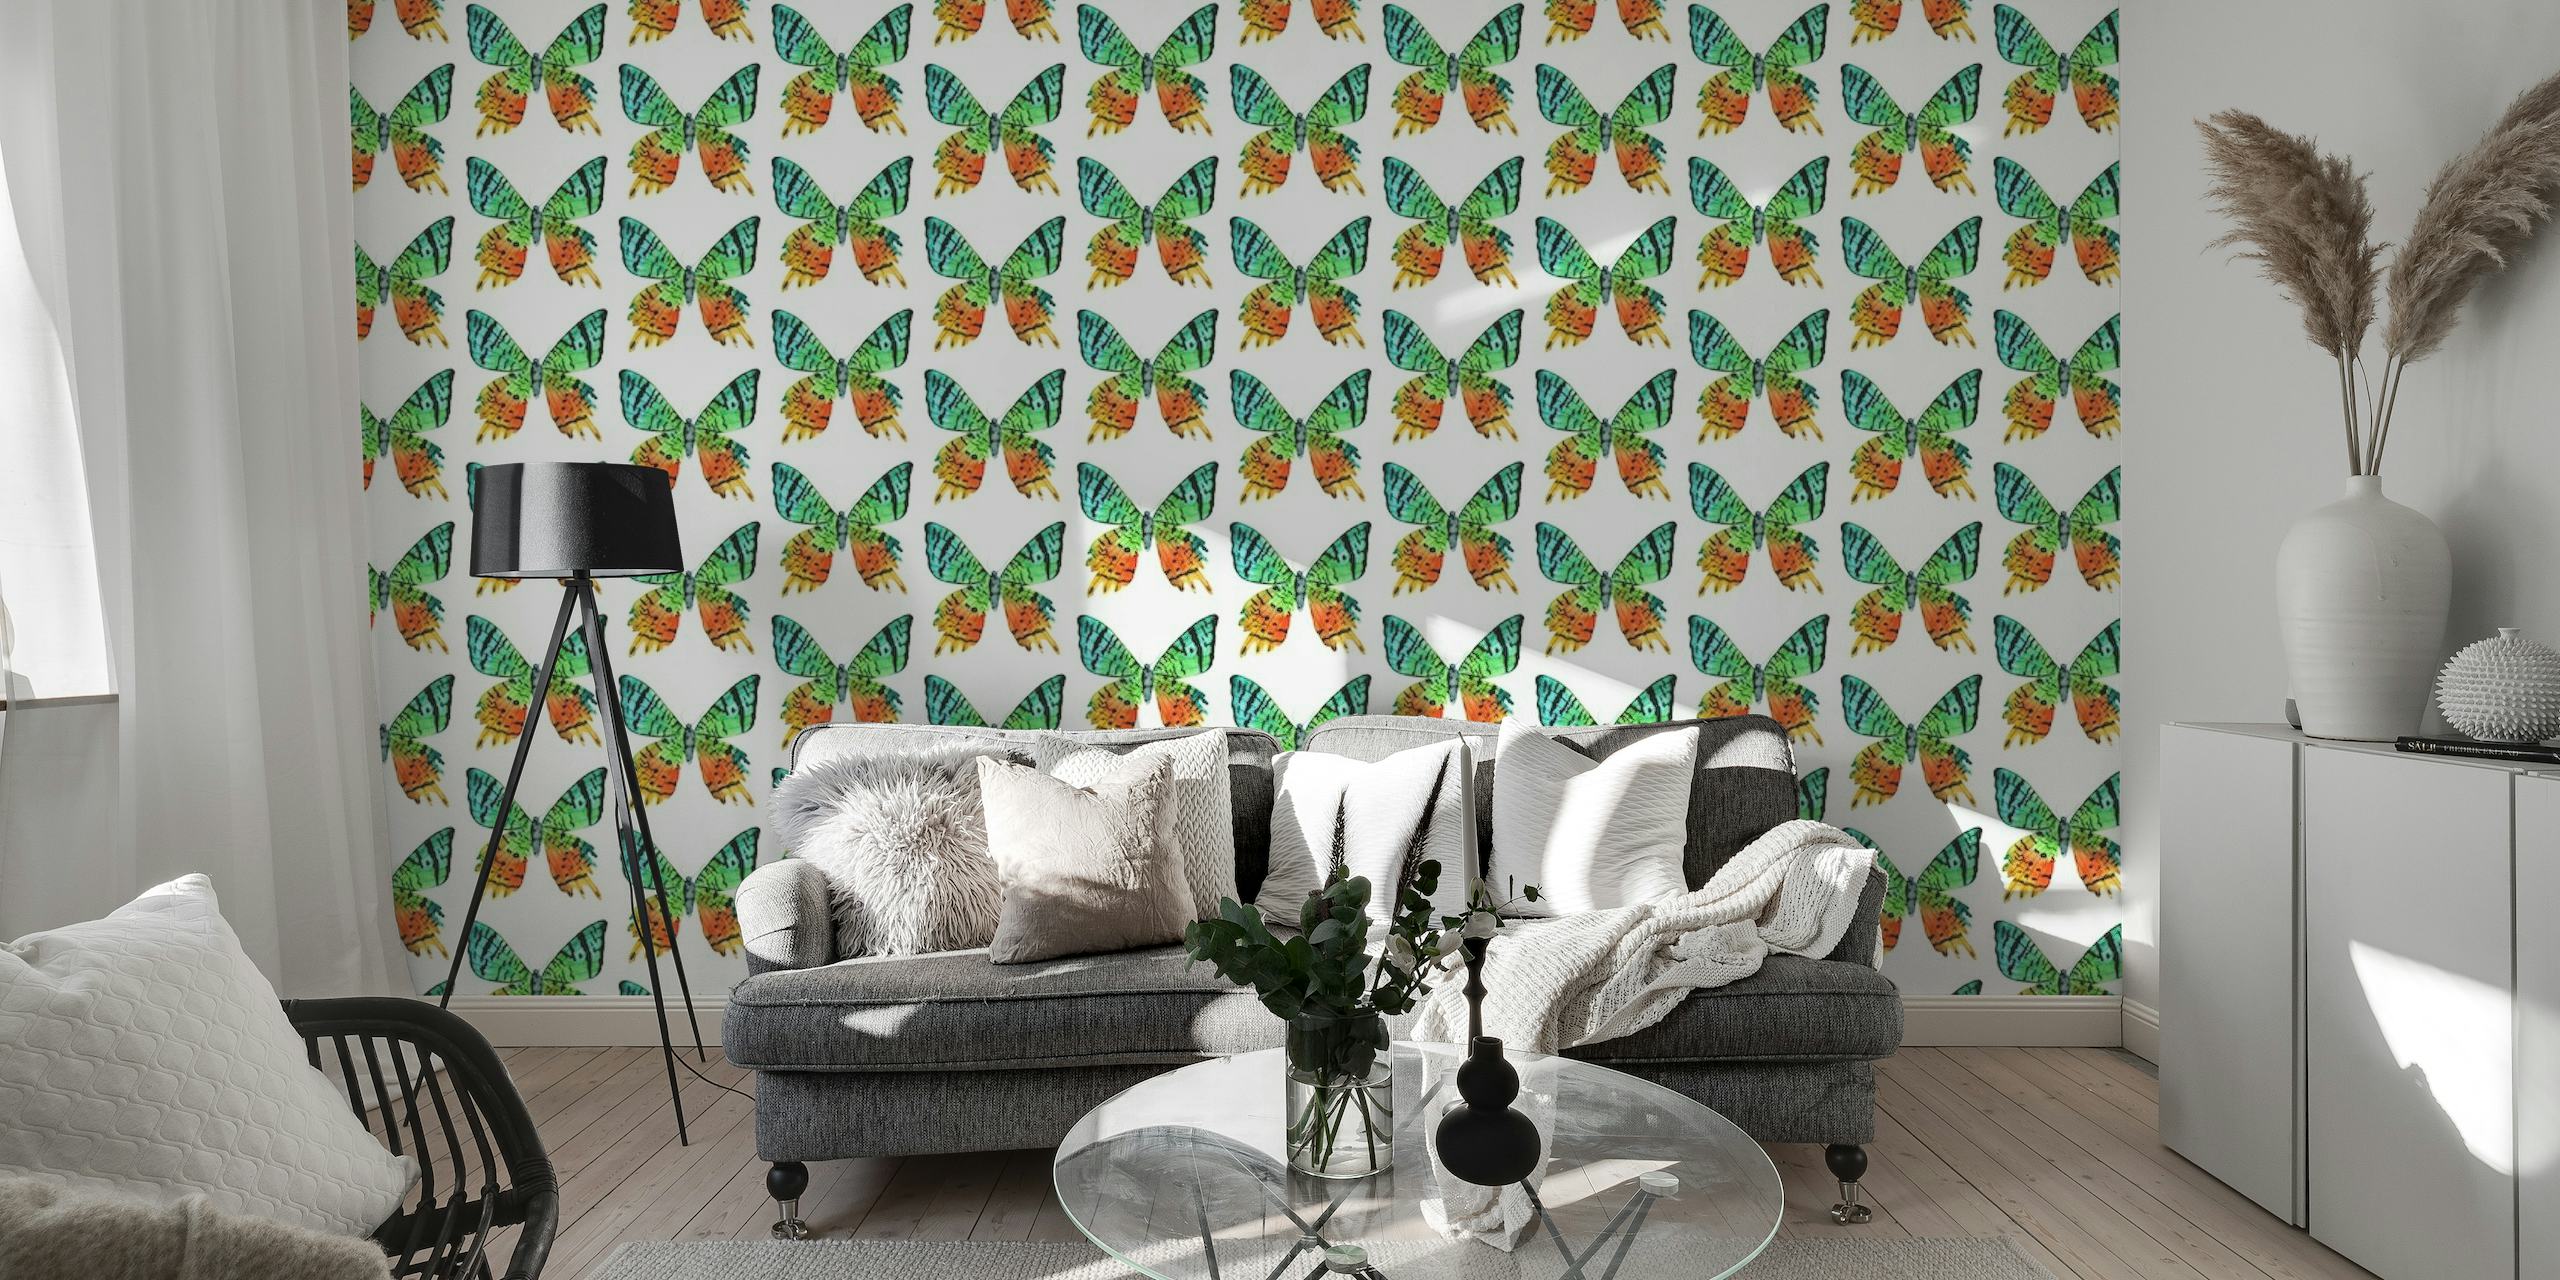 Madagascar Sunset Moth pattern wall mural with vibrant orange and green colors